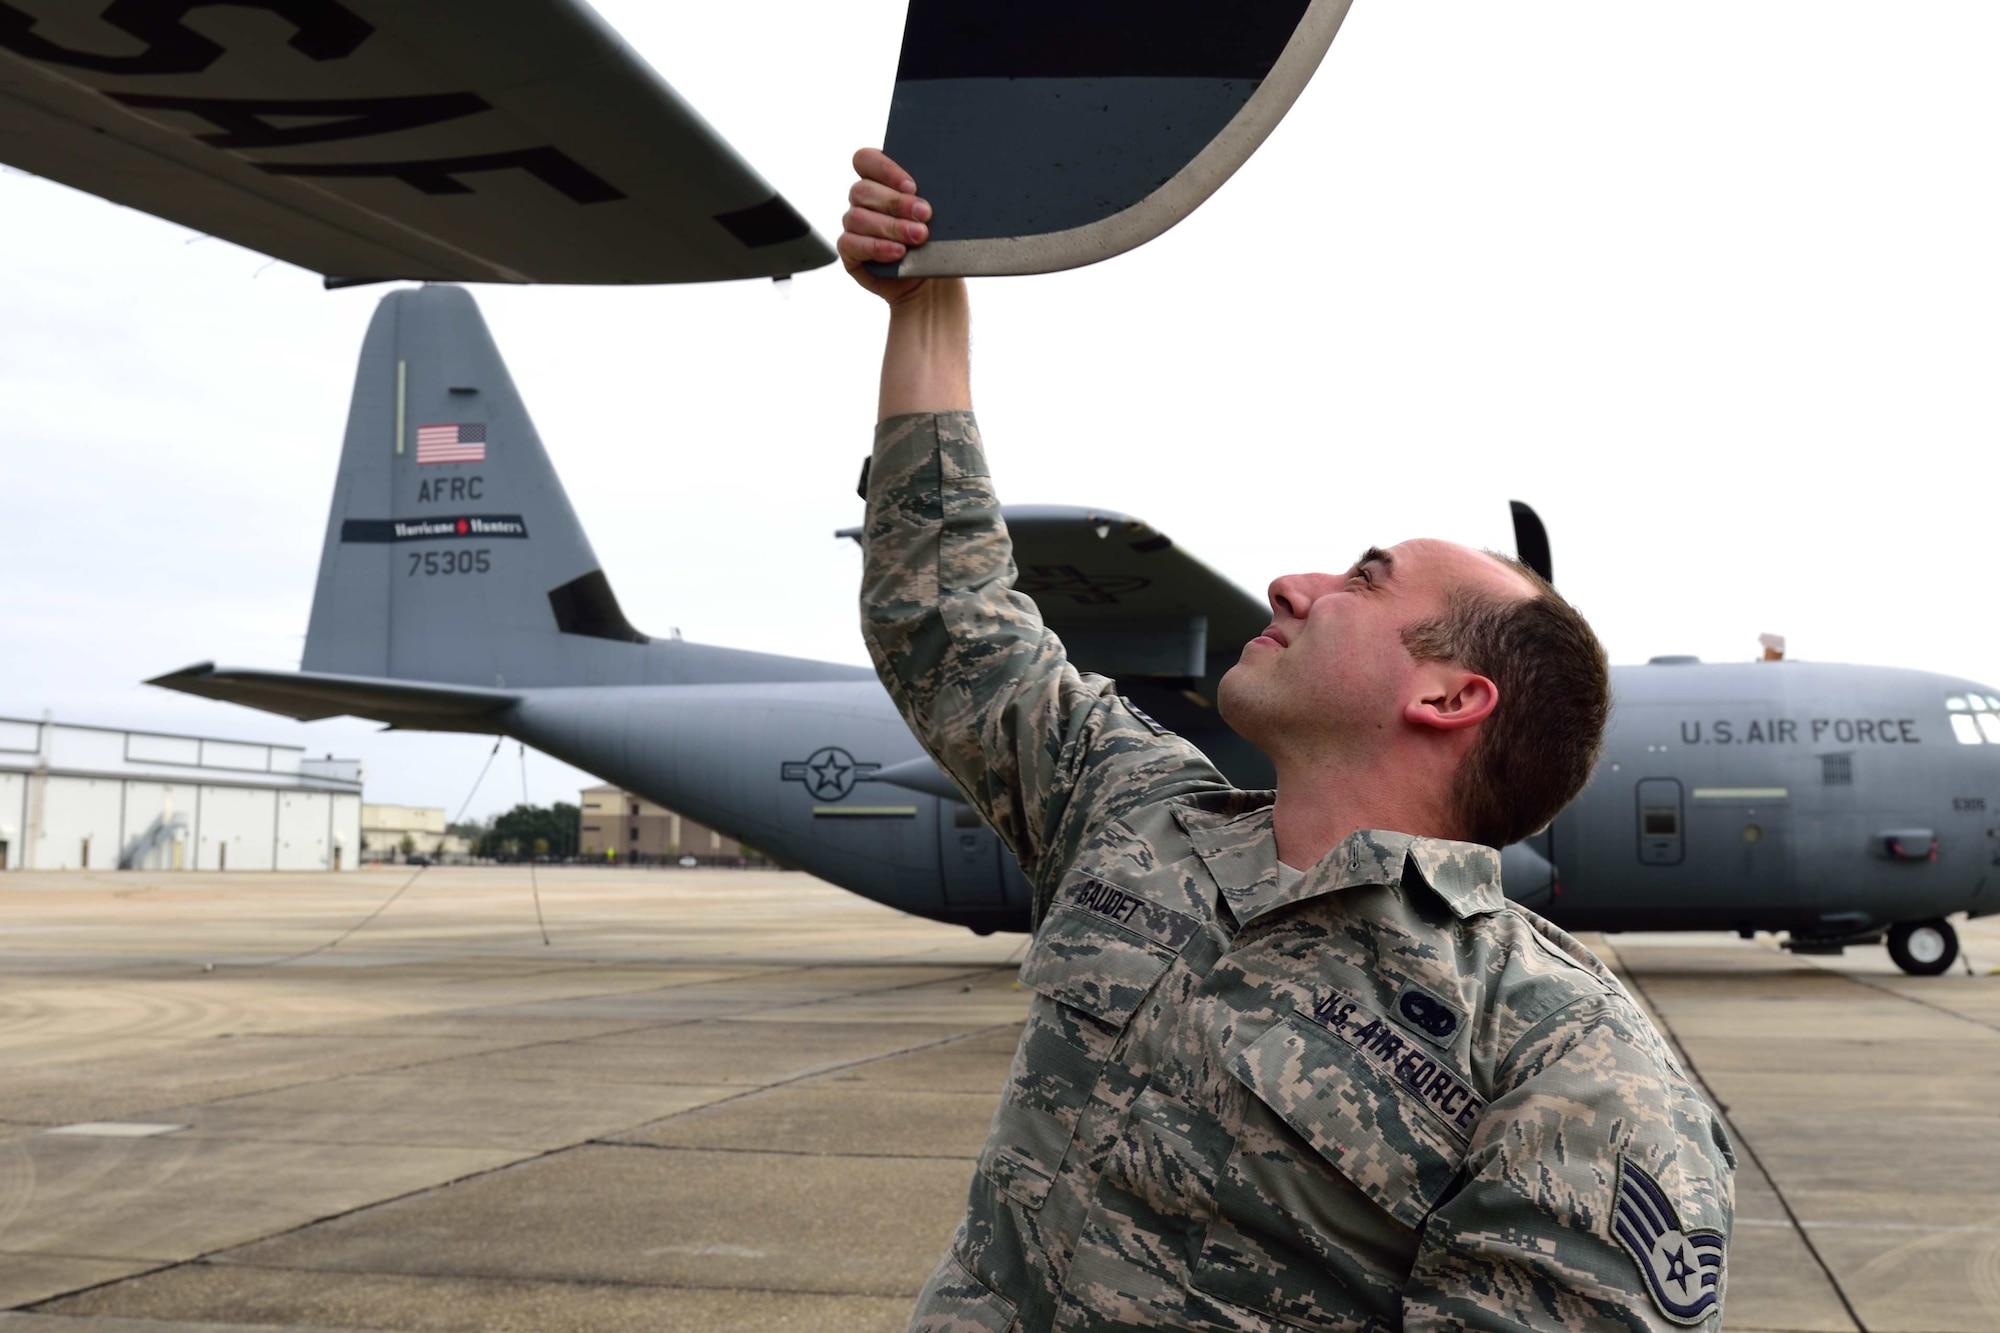 Staff Sgt. Patrick Gaudet, 403rd Aircraft Maintenance Squadron dedicated crew chief, inspects the propeller blade of a WC-130J Super Hercules aircraft to make sure there are no cracks or other damage Jan. 26, 2018, at Keesler Air Force Base, Mississippi. Crew chiefs are responsible for performing numerous checks, tests and maintenance on aircraft to make sure the Air Force fleet is fit for flight. (U.S. Air Force photo by Tech. Sgt. Ryan Labadens)